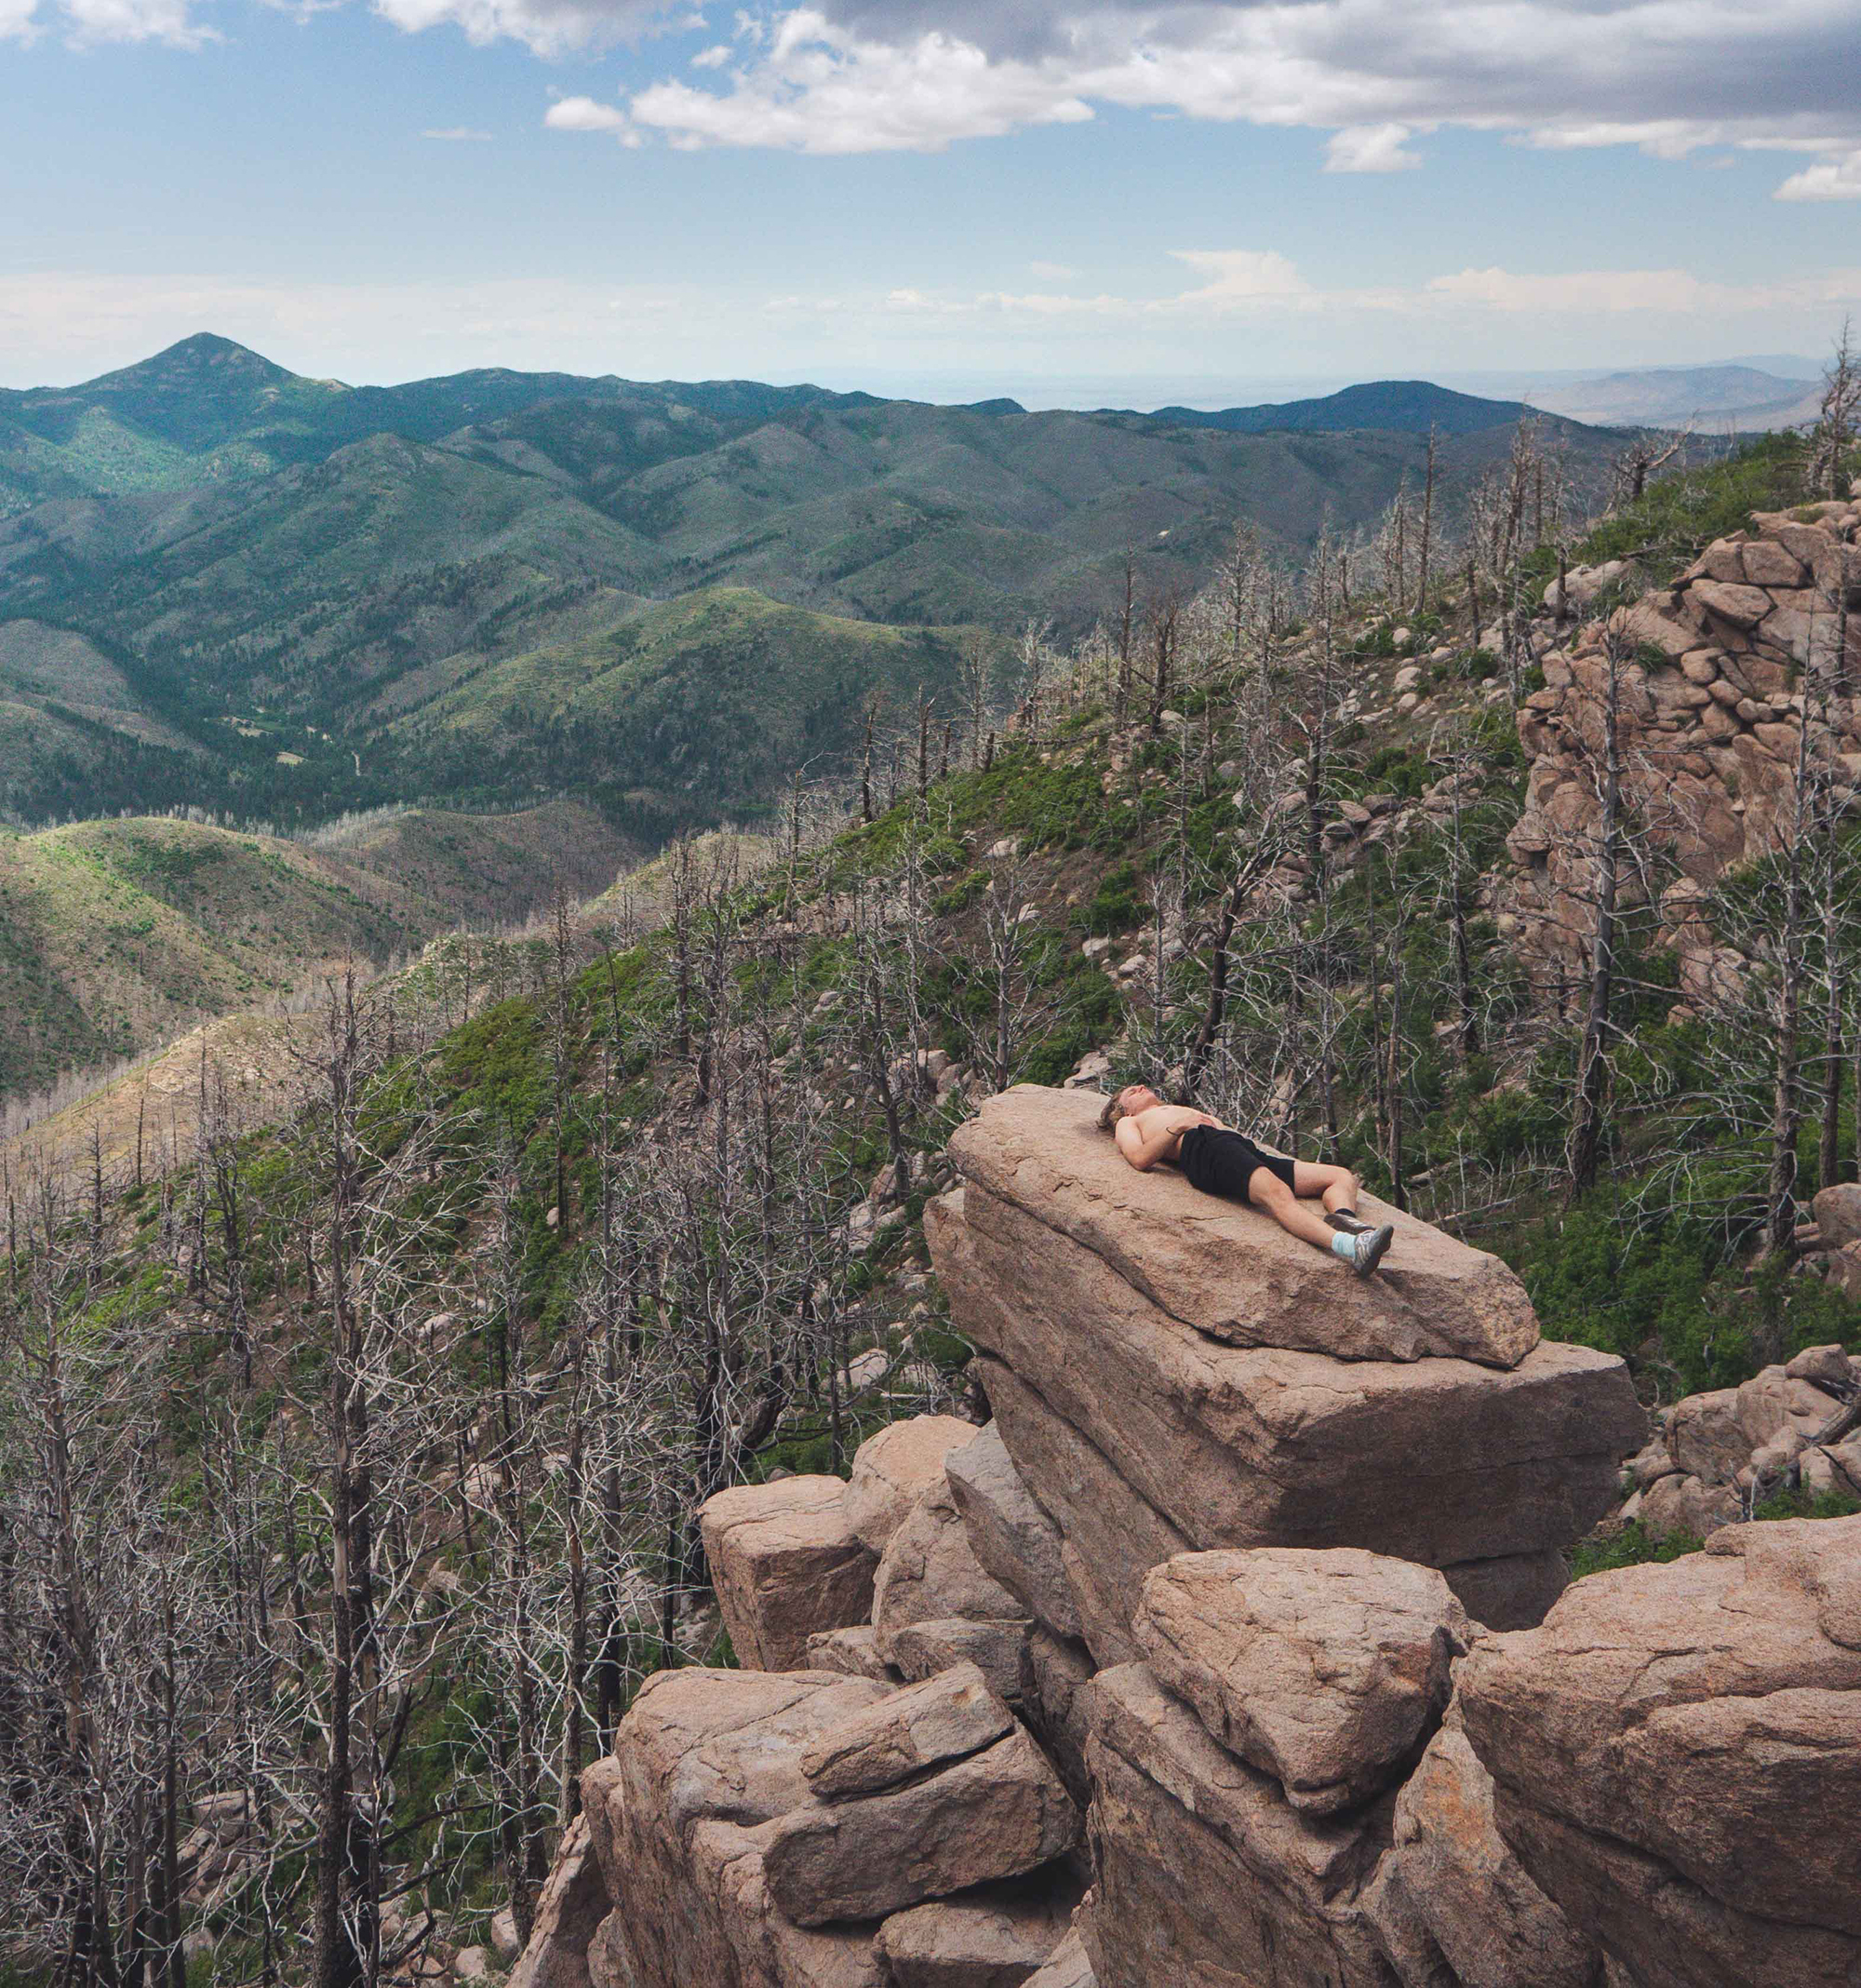 A lone hiker relaxes on a high rock outcroppingn overlooking a deep mountain valley.